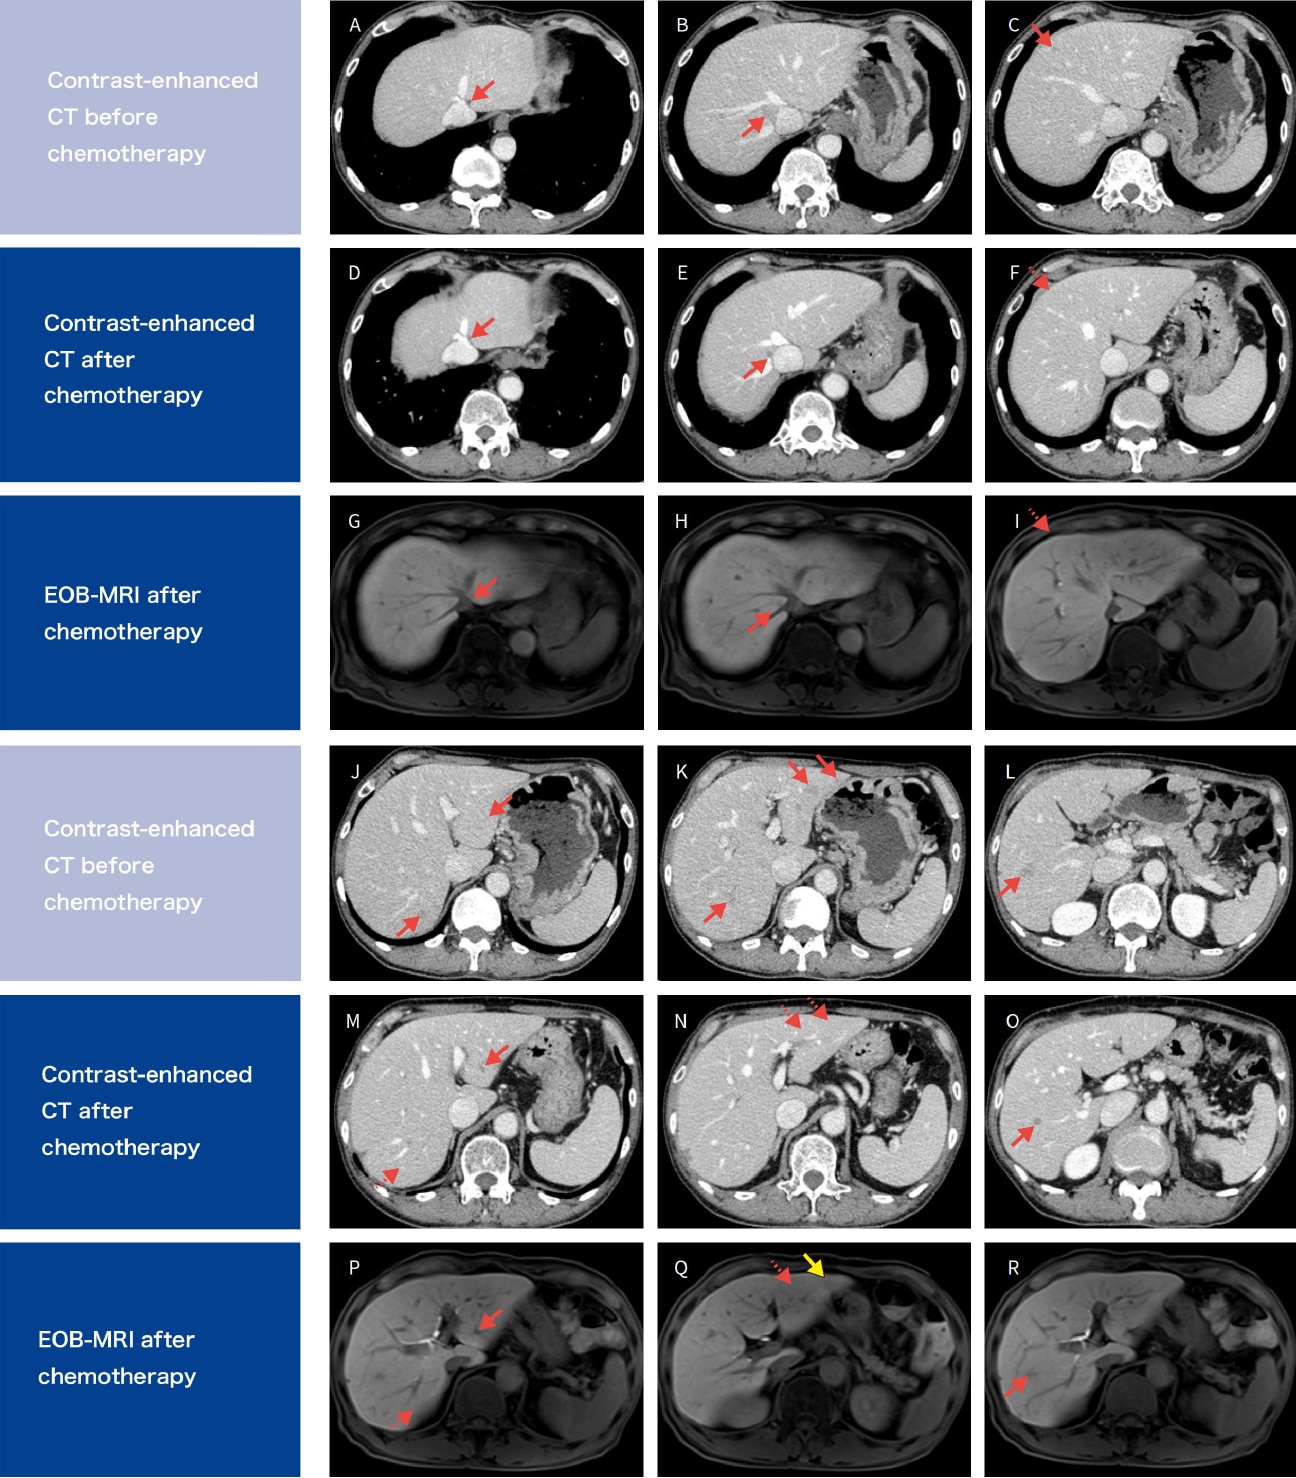 Investigation for tumors with EOB-MRI before chemotherapy